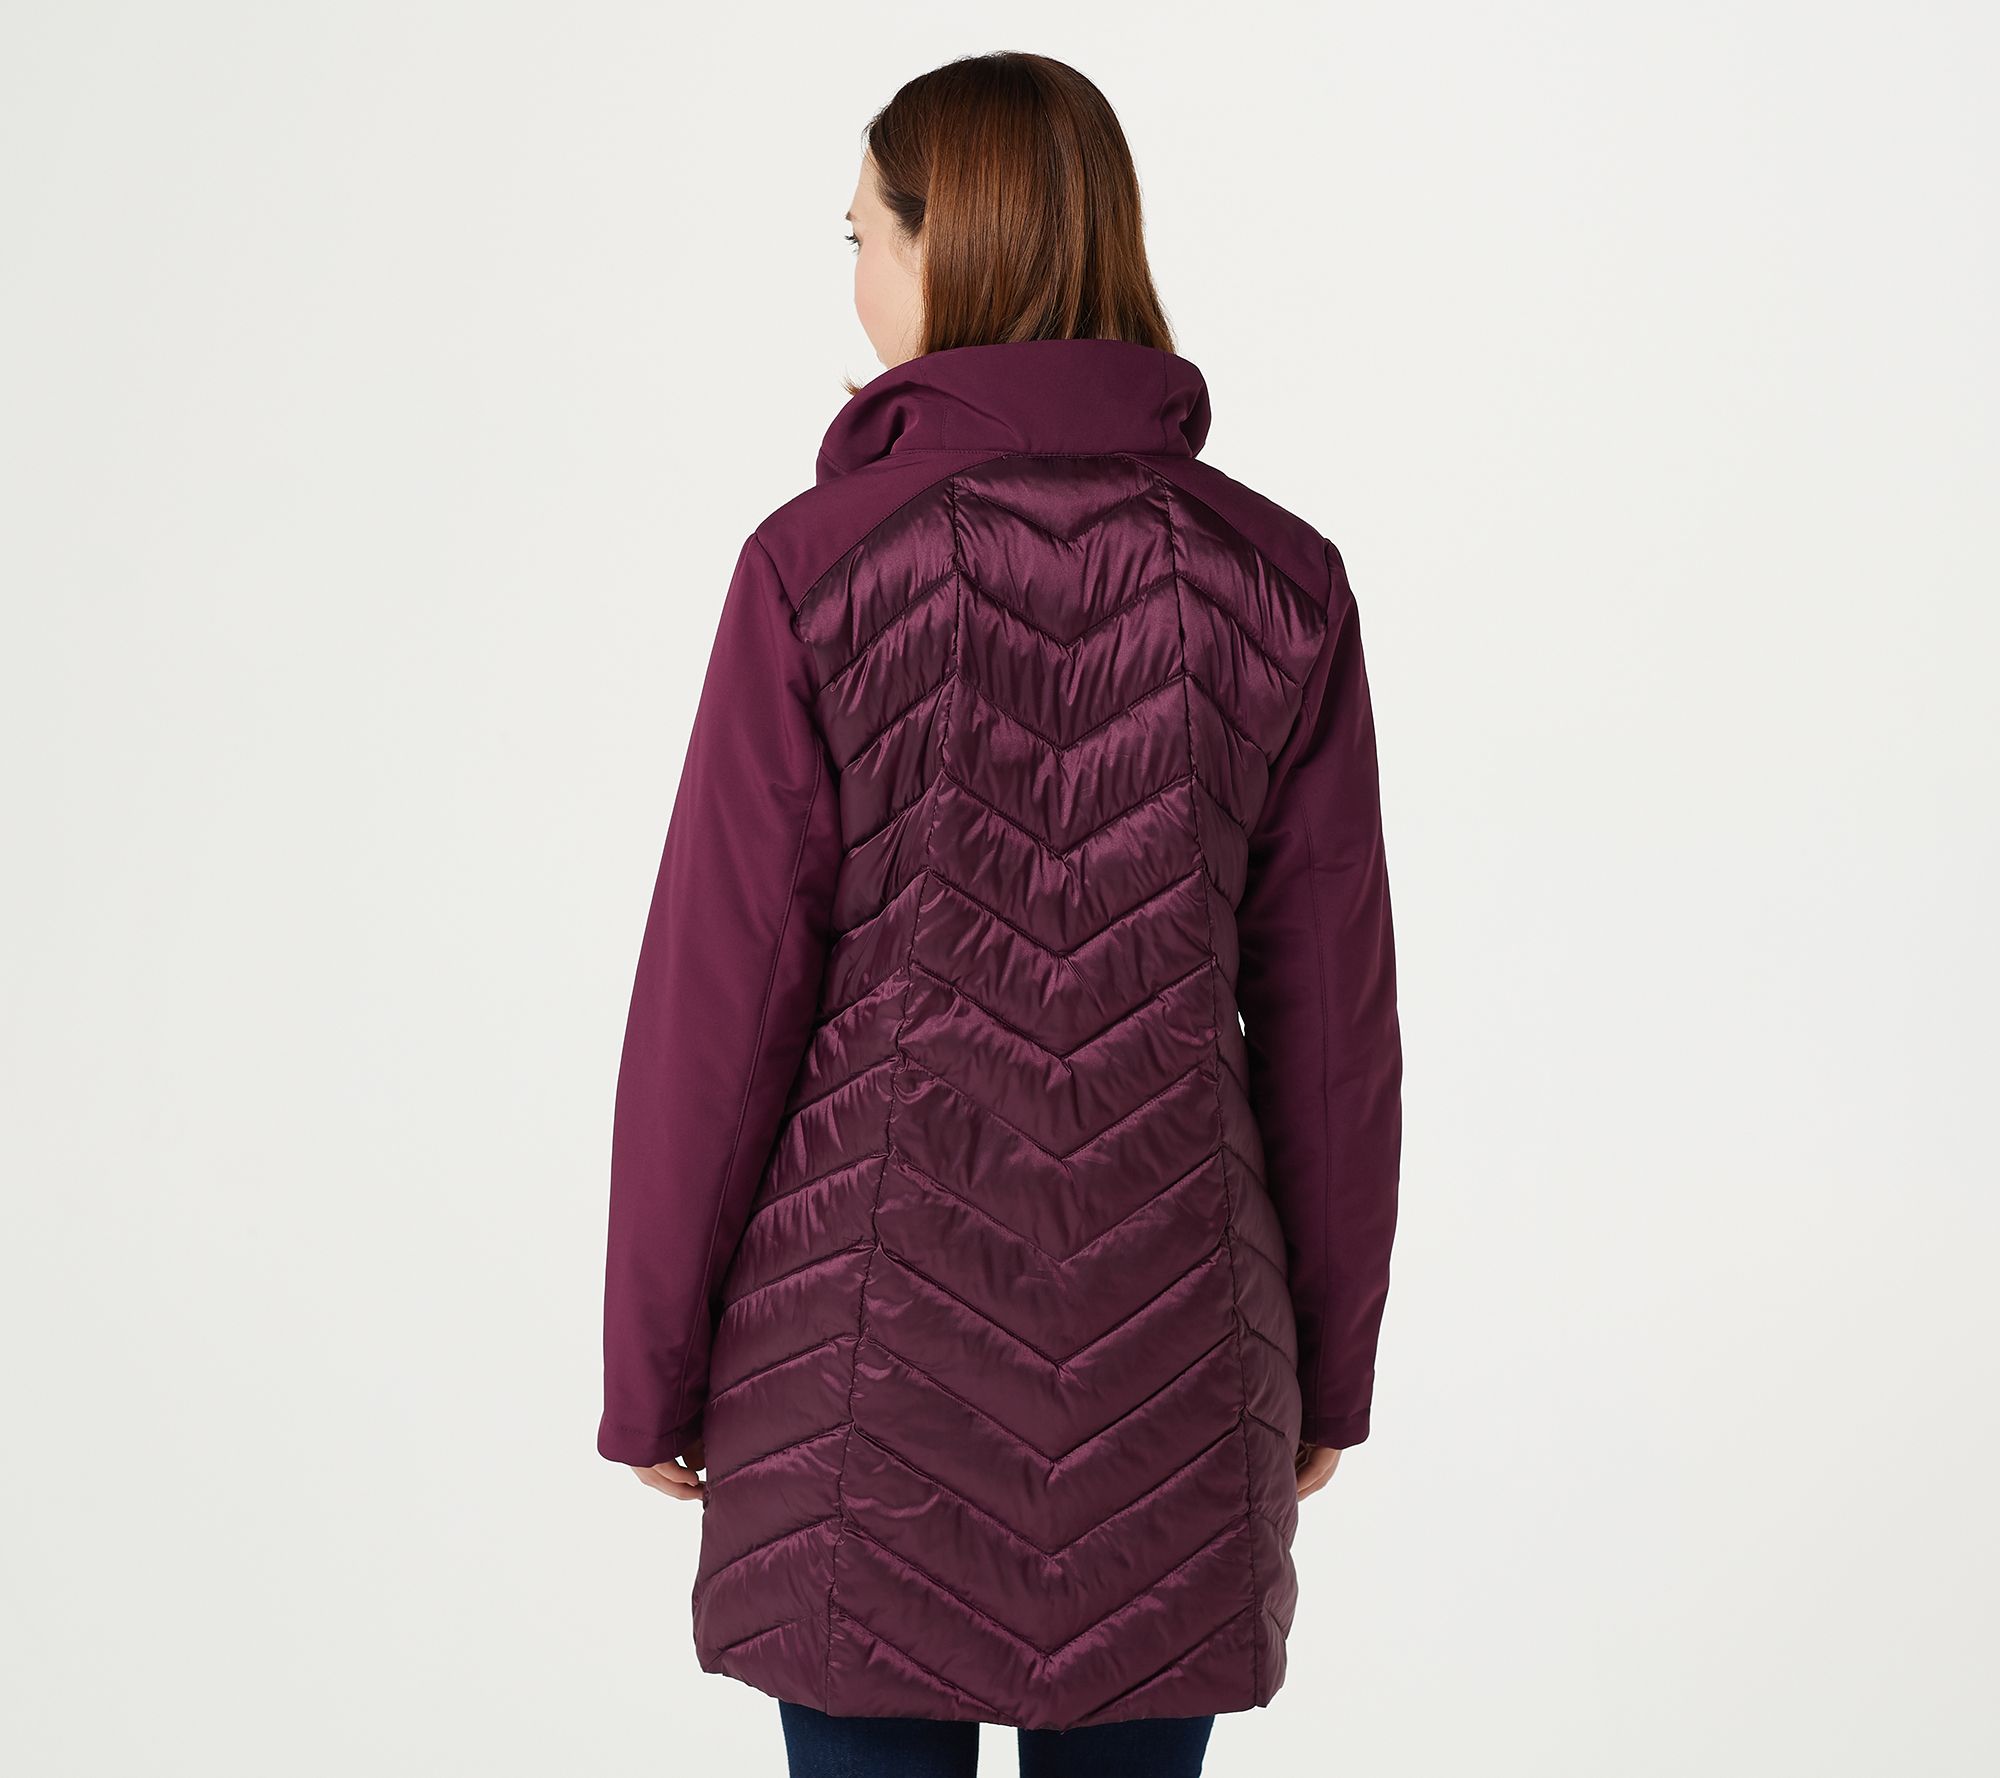 Nuage Chevron Quilted Puffer Coat with Removable Hood - QVC.com